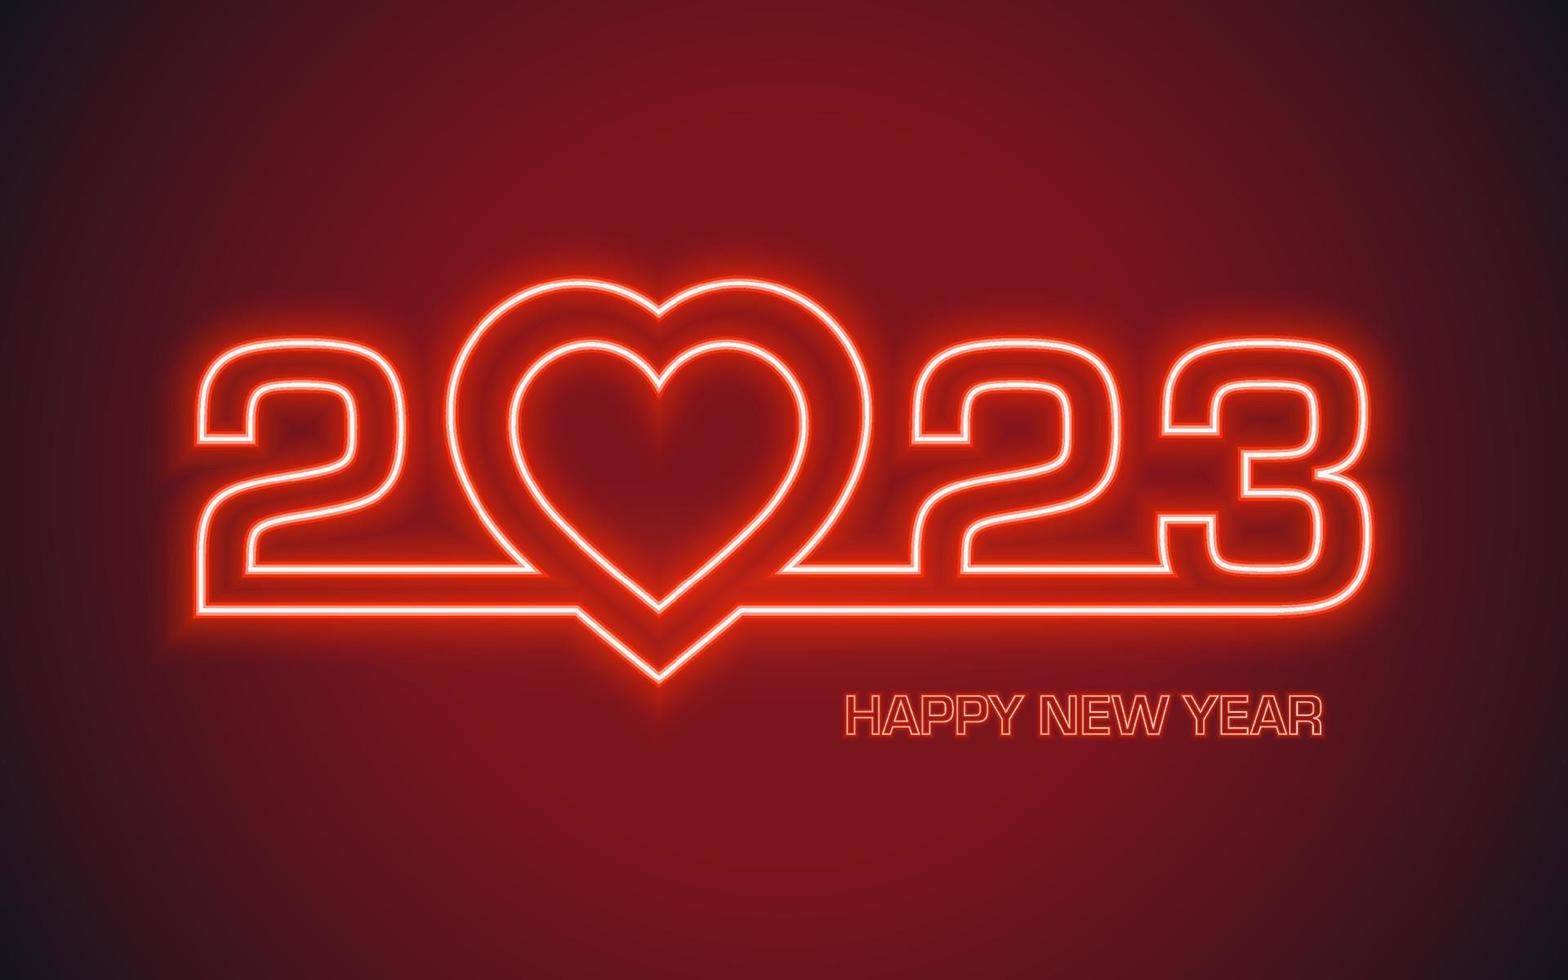 Happy New Year 2023, red neon style design on color background vector